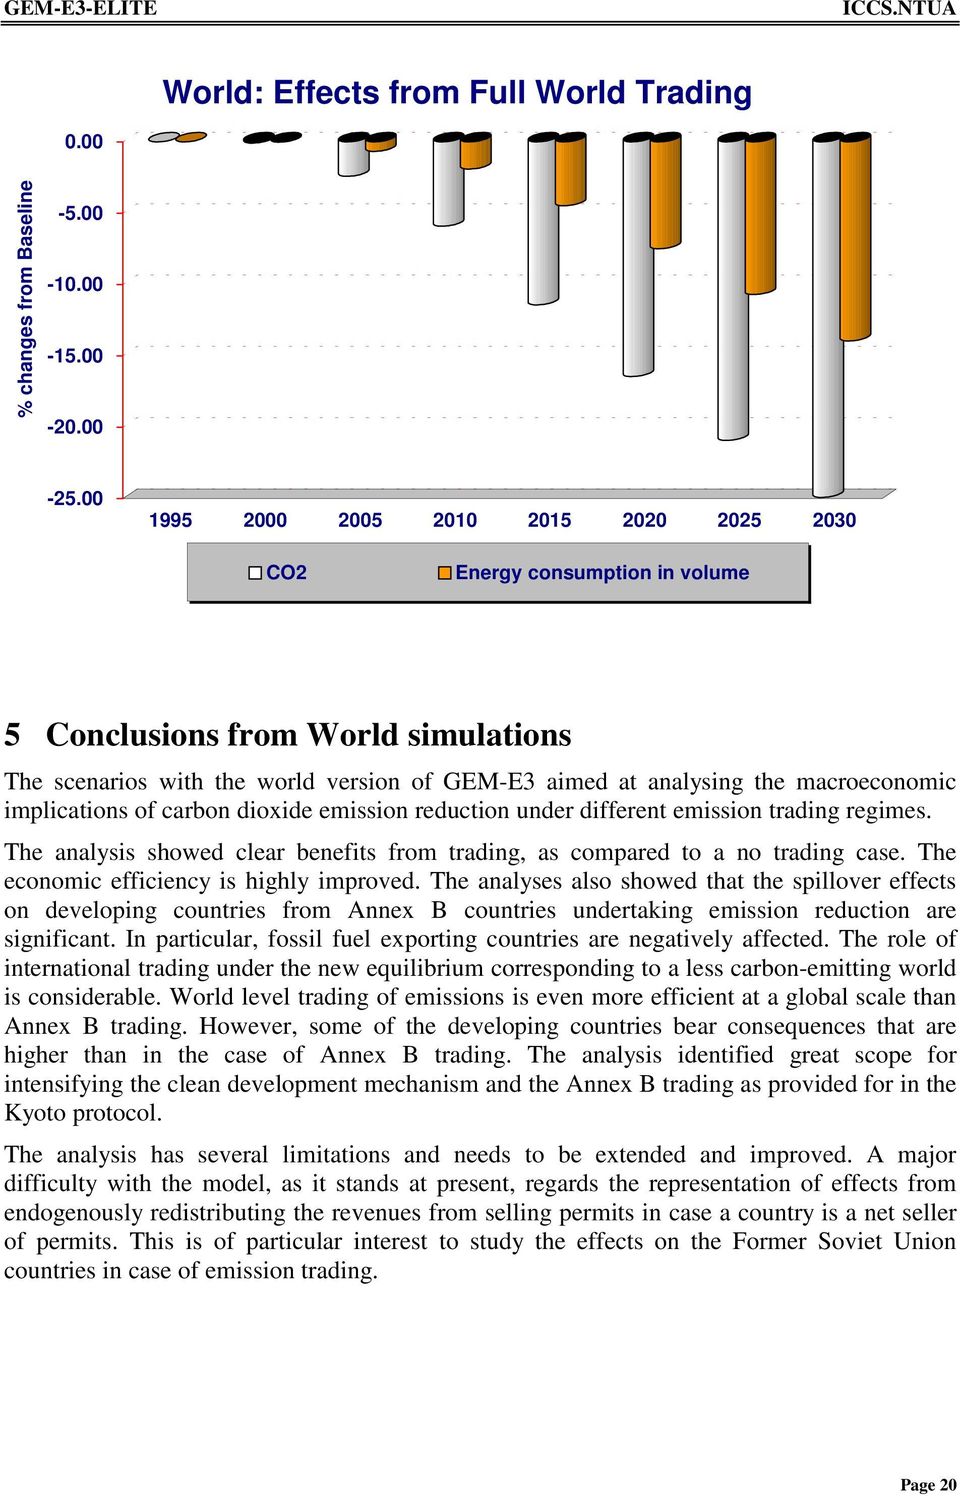 implications of carbon dioxide emission reduction under different emission trading regimes. The analysis showed clear benefits from trading, as compared to a no trading case.